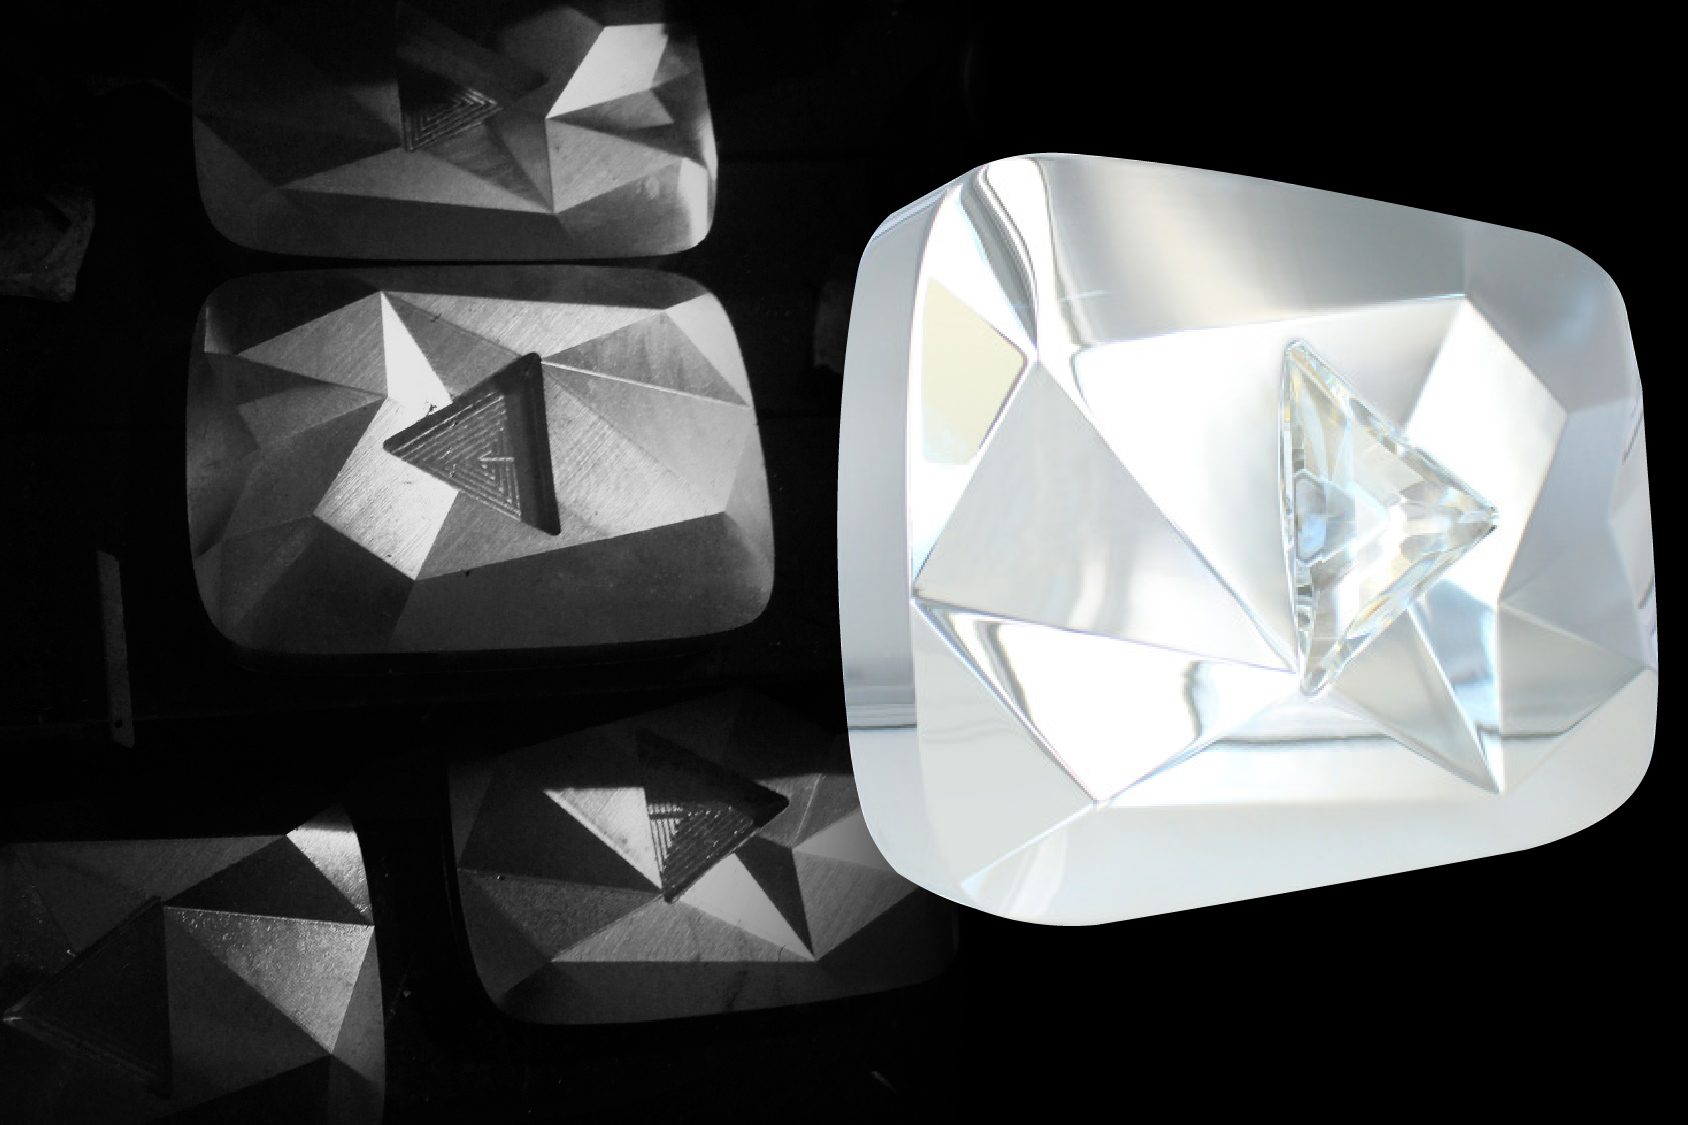 YouTube Diamond Play Button trophy and unpolished machined forms